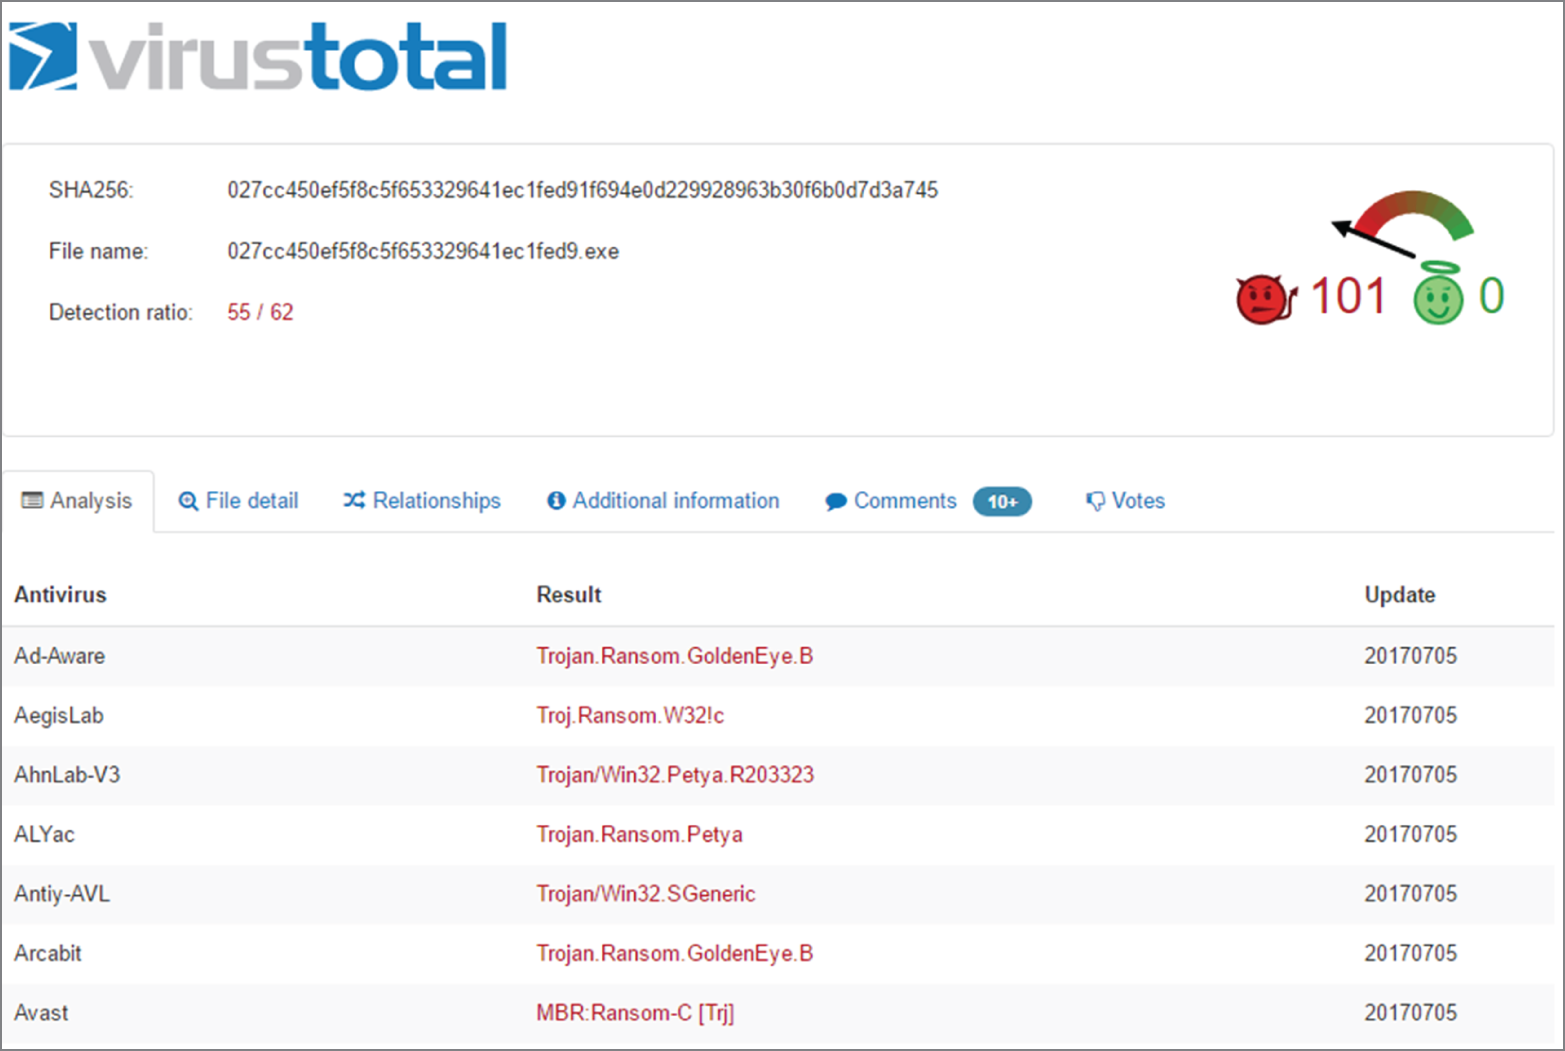 A window page of VirusTotal presents an output. The data of antivirus, result, and update were exhibited in a table.